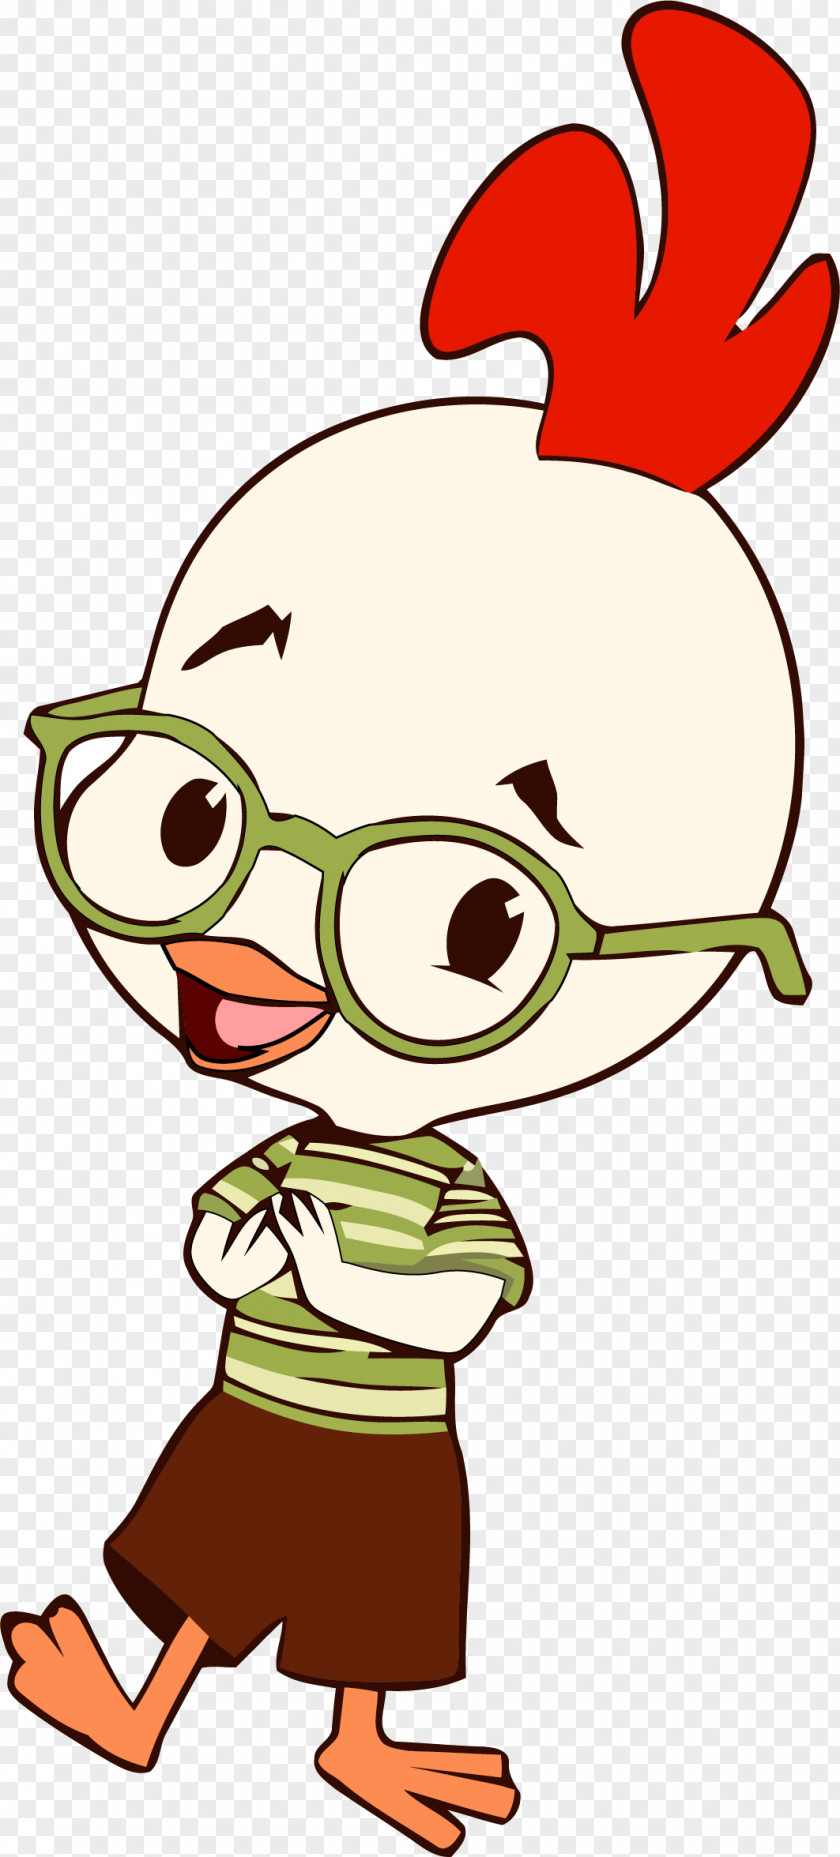 Chicken Little Disney Character Clip Art Buck Cluck Illustration Drawing Coloring Book PNG